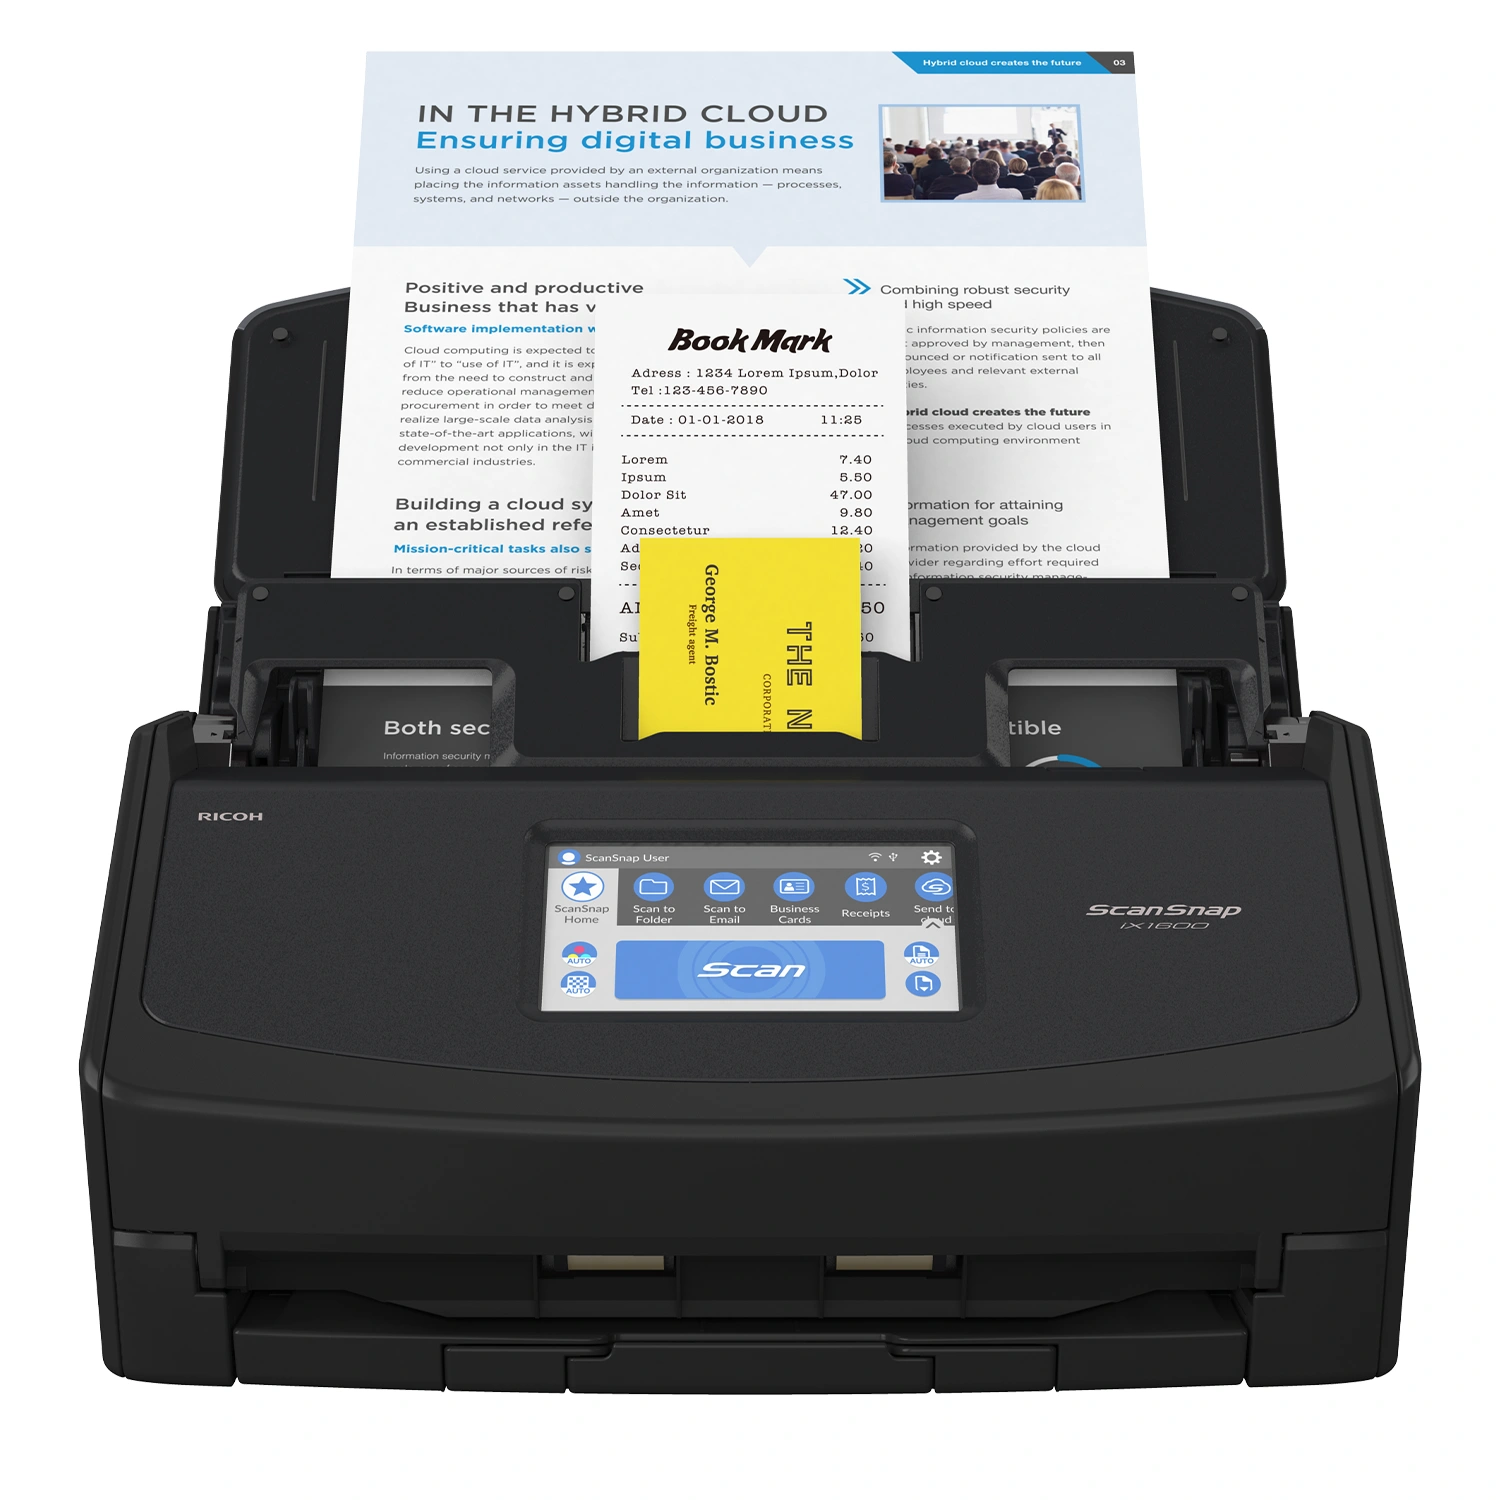 A ScanSnap iX1600 scanner in black shown with documents feeding from the top